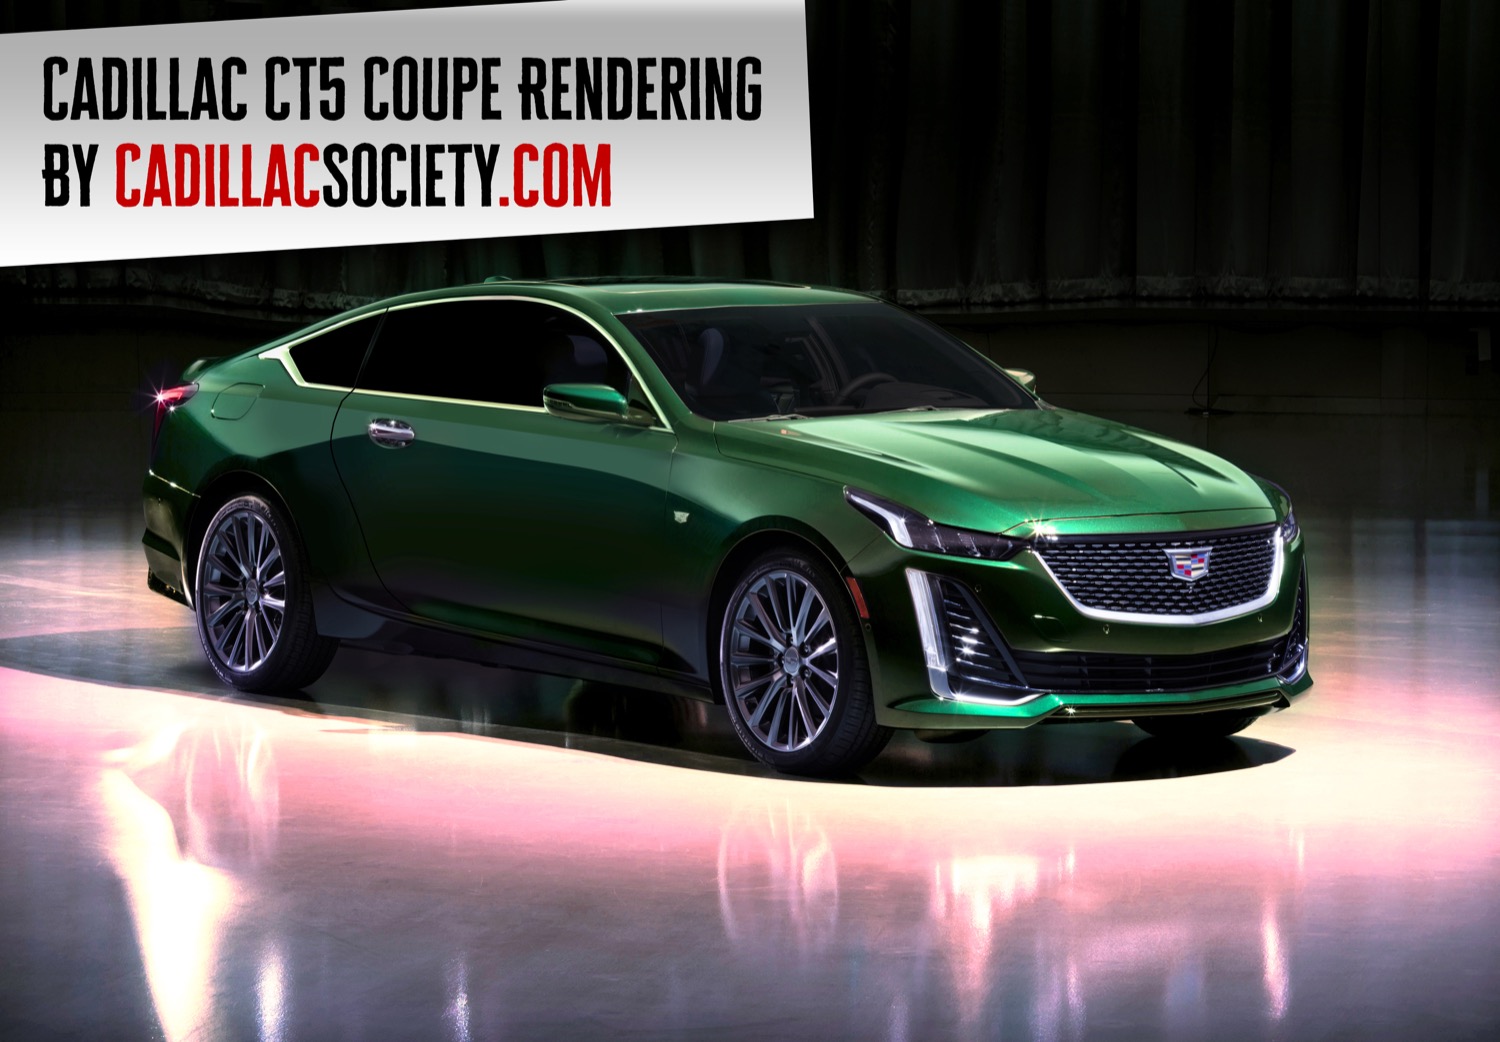 We Render The Cadillac CT9 Coupe